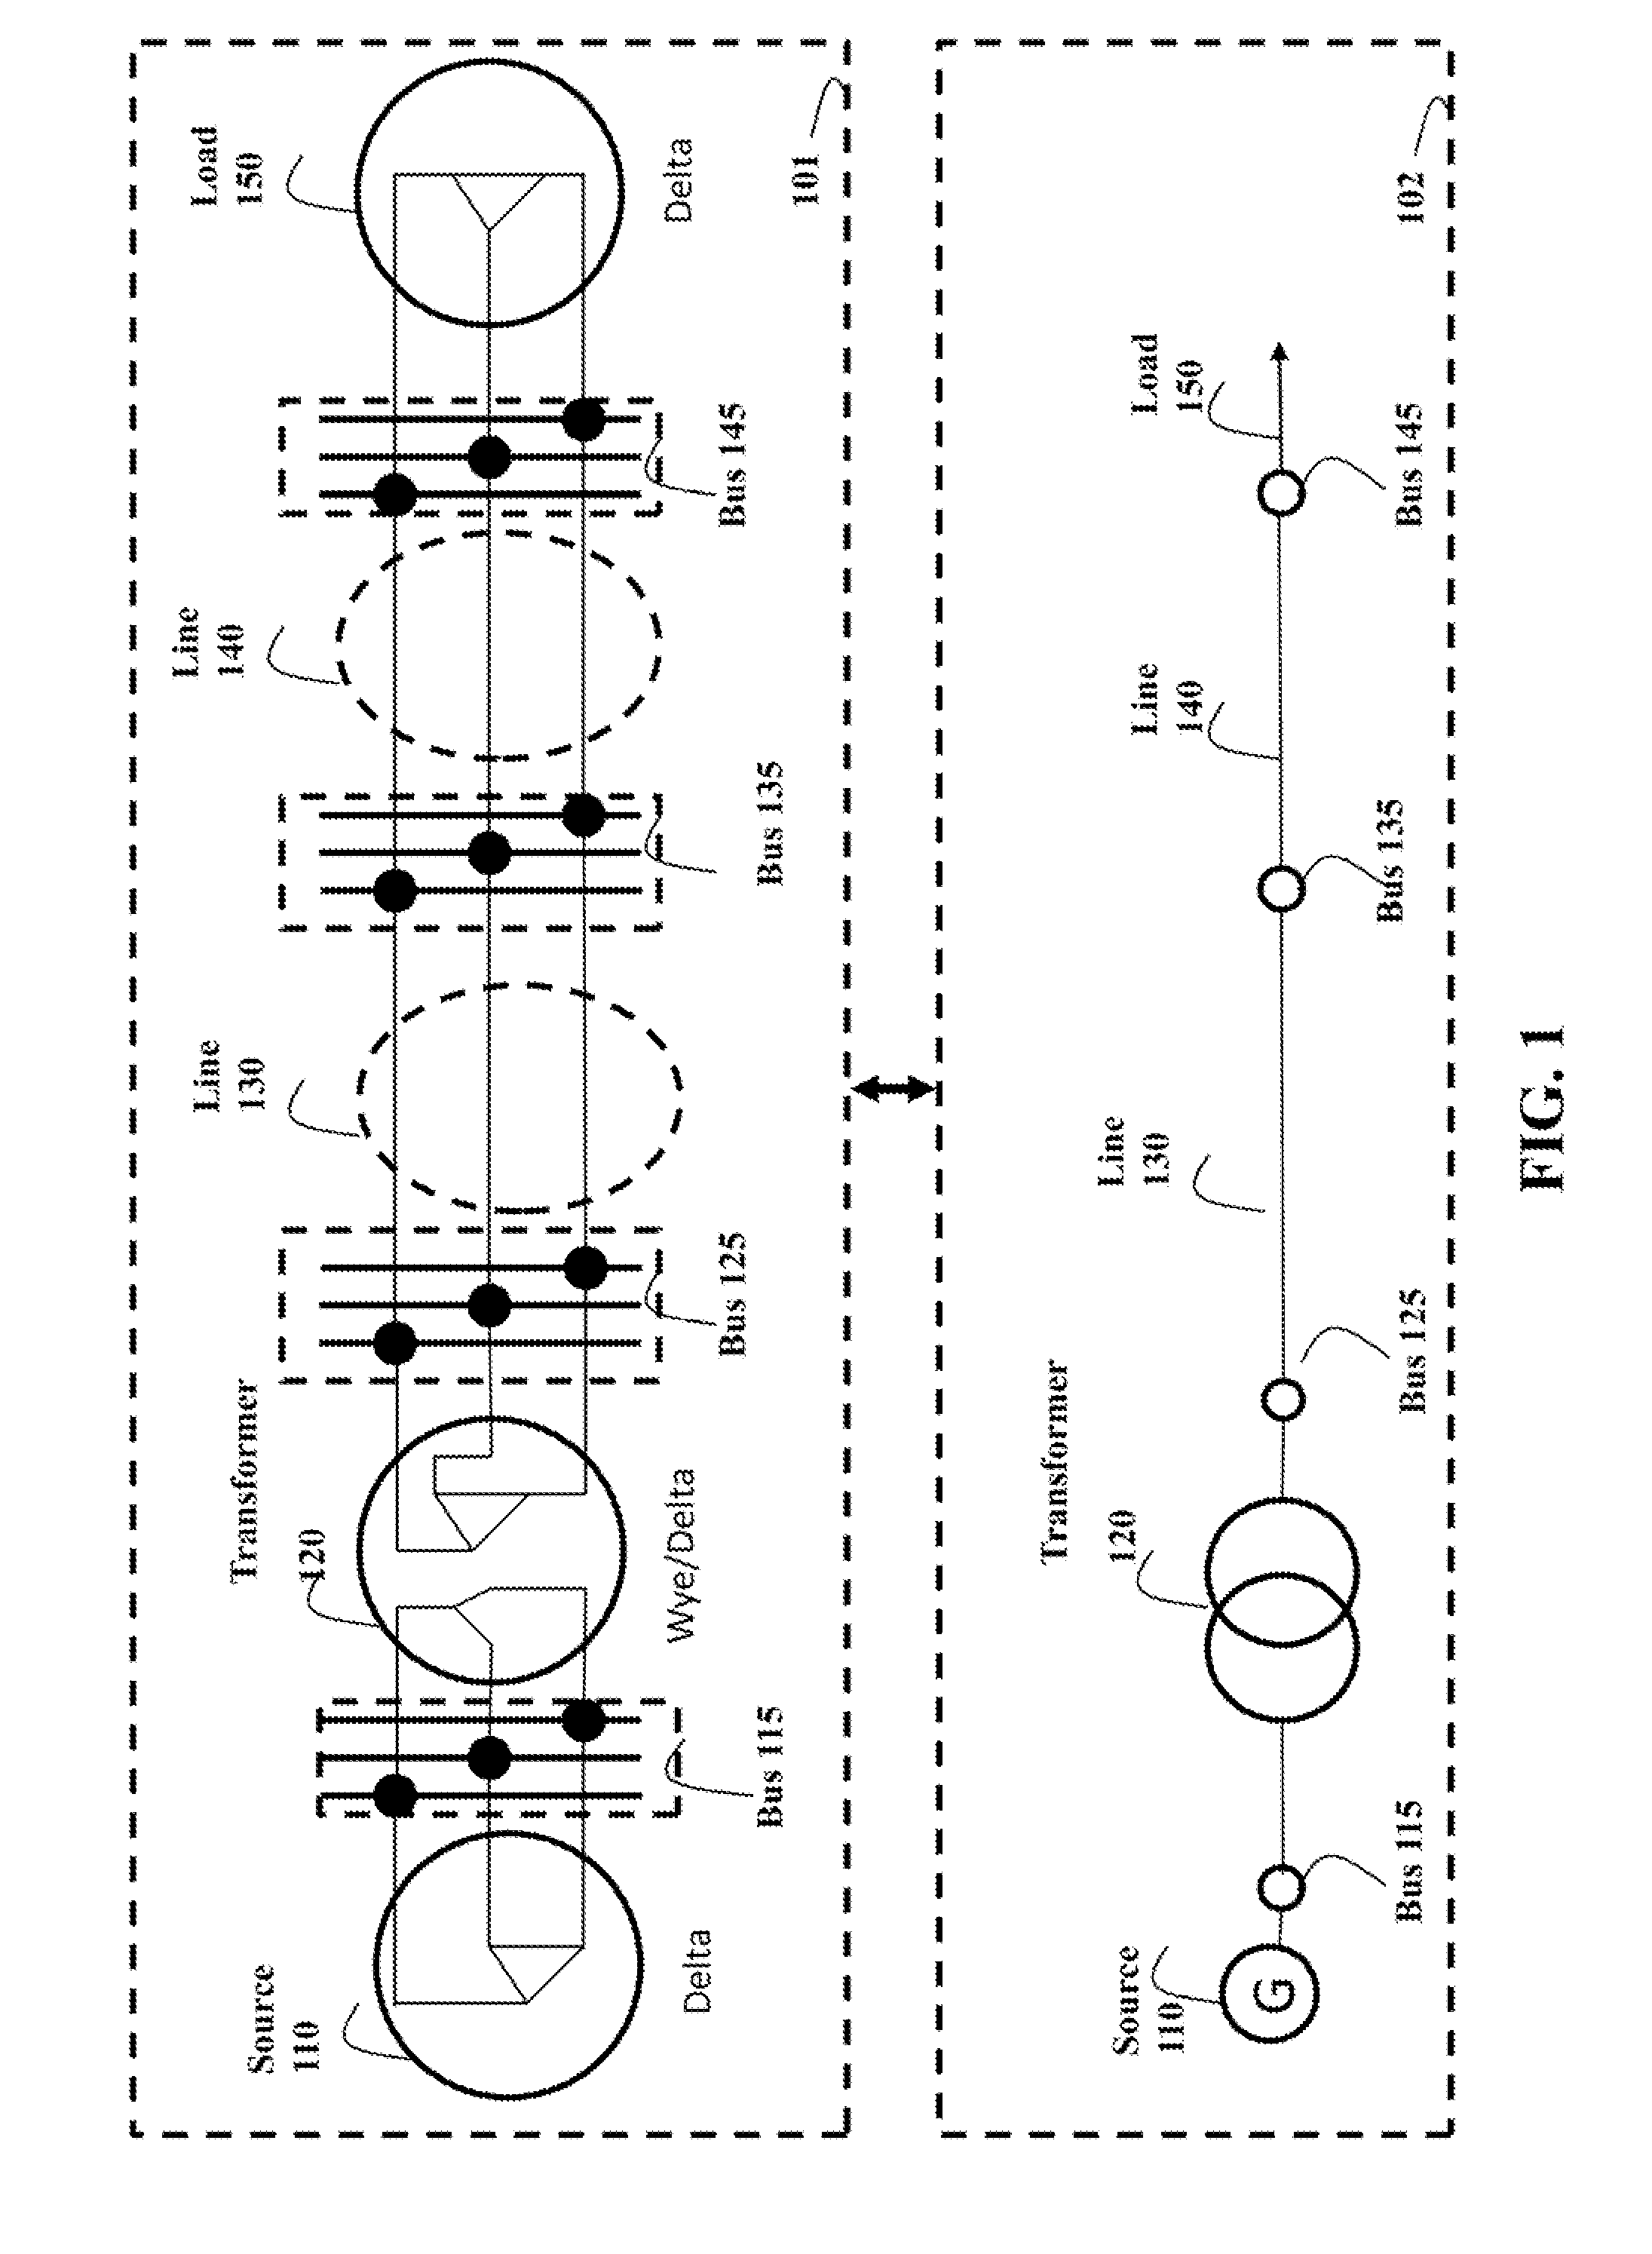 Method for Analyzing Faults in Ungrounded Power Distribution Systems